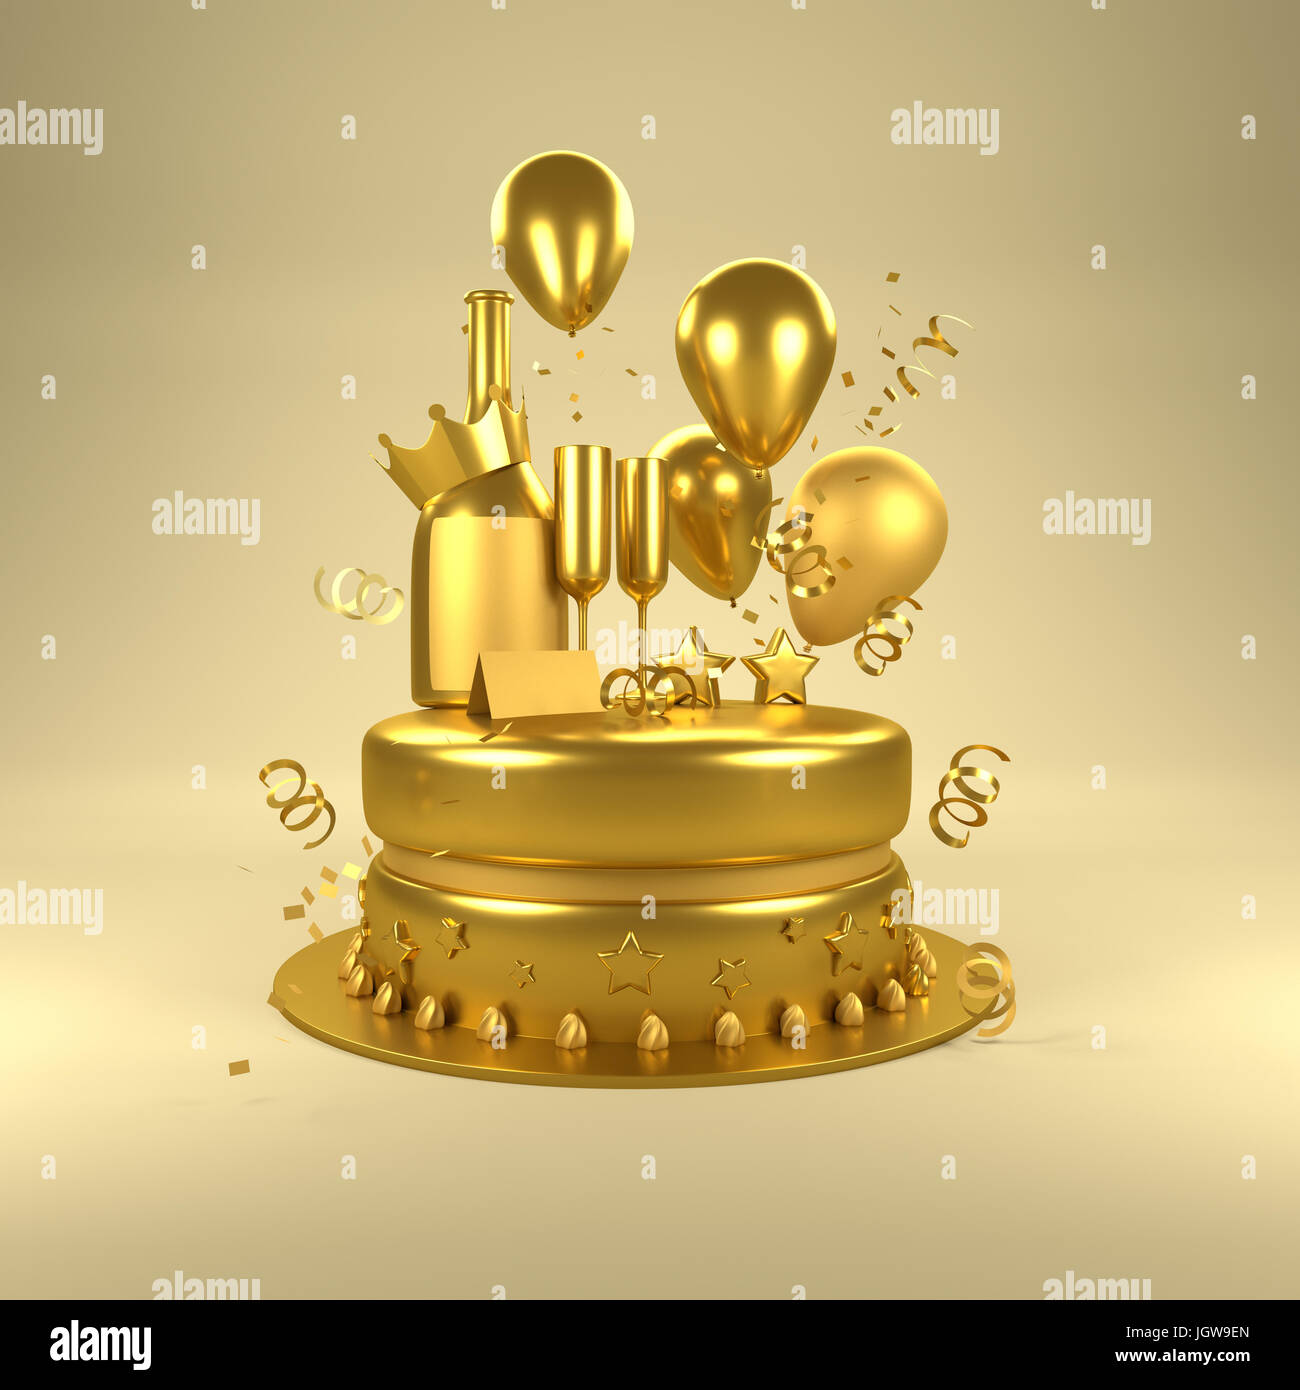 Gold Birthday Surprise. Birthday celebrations with gold balloons, gold glasses and champagne bottle and a cake. 3D illustration. Stock Photo